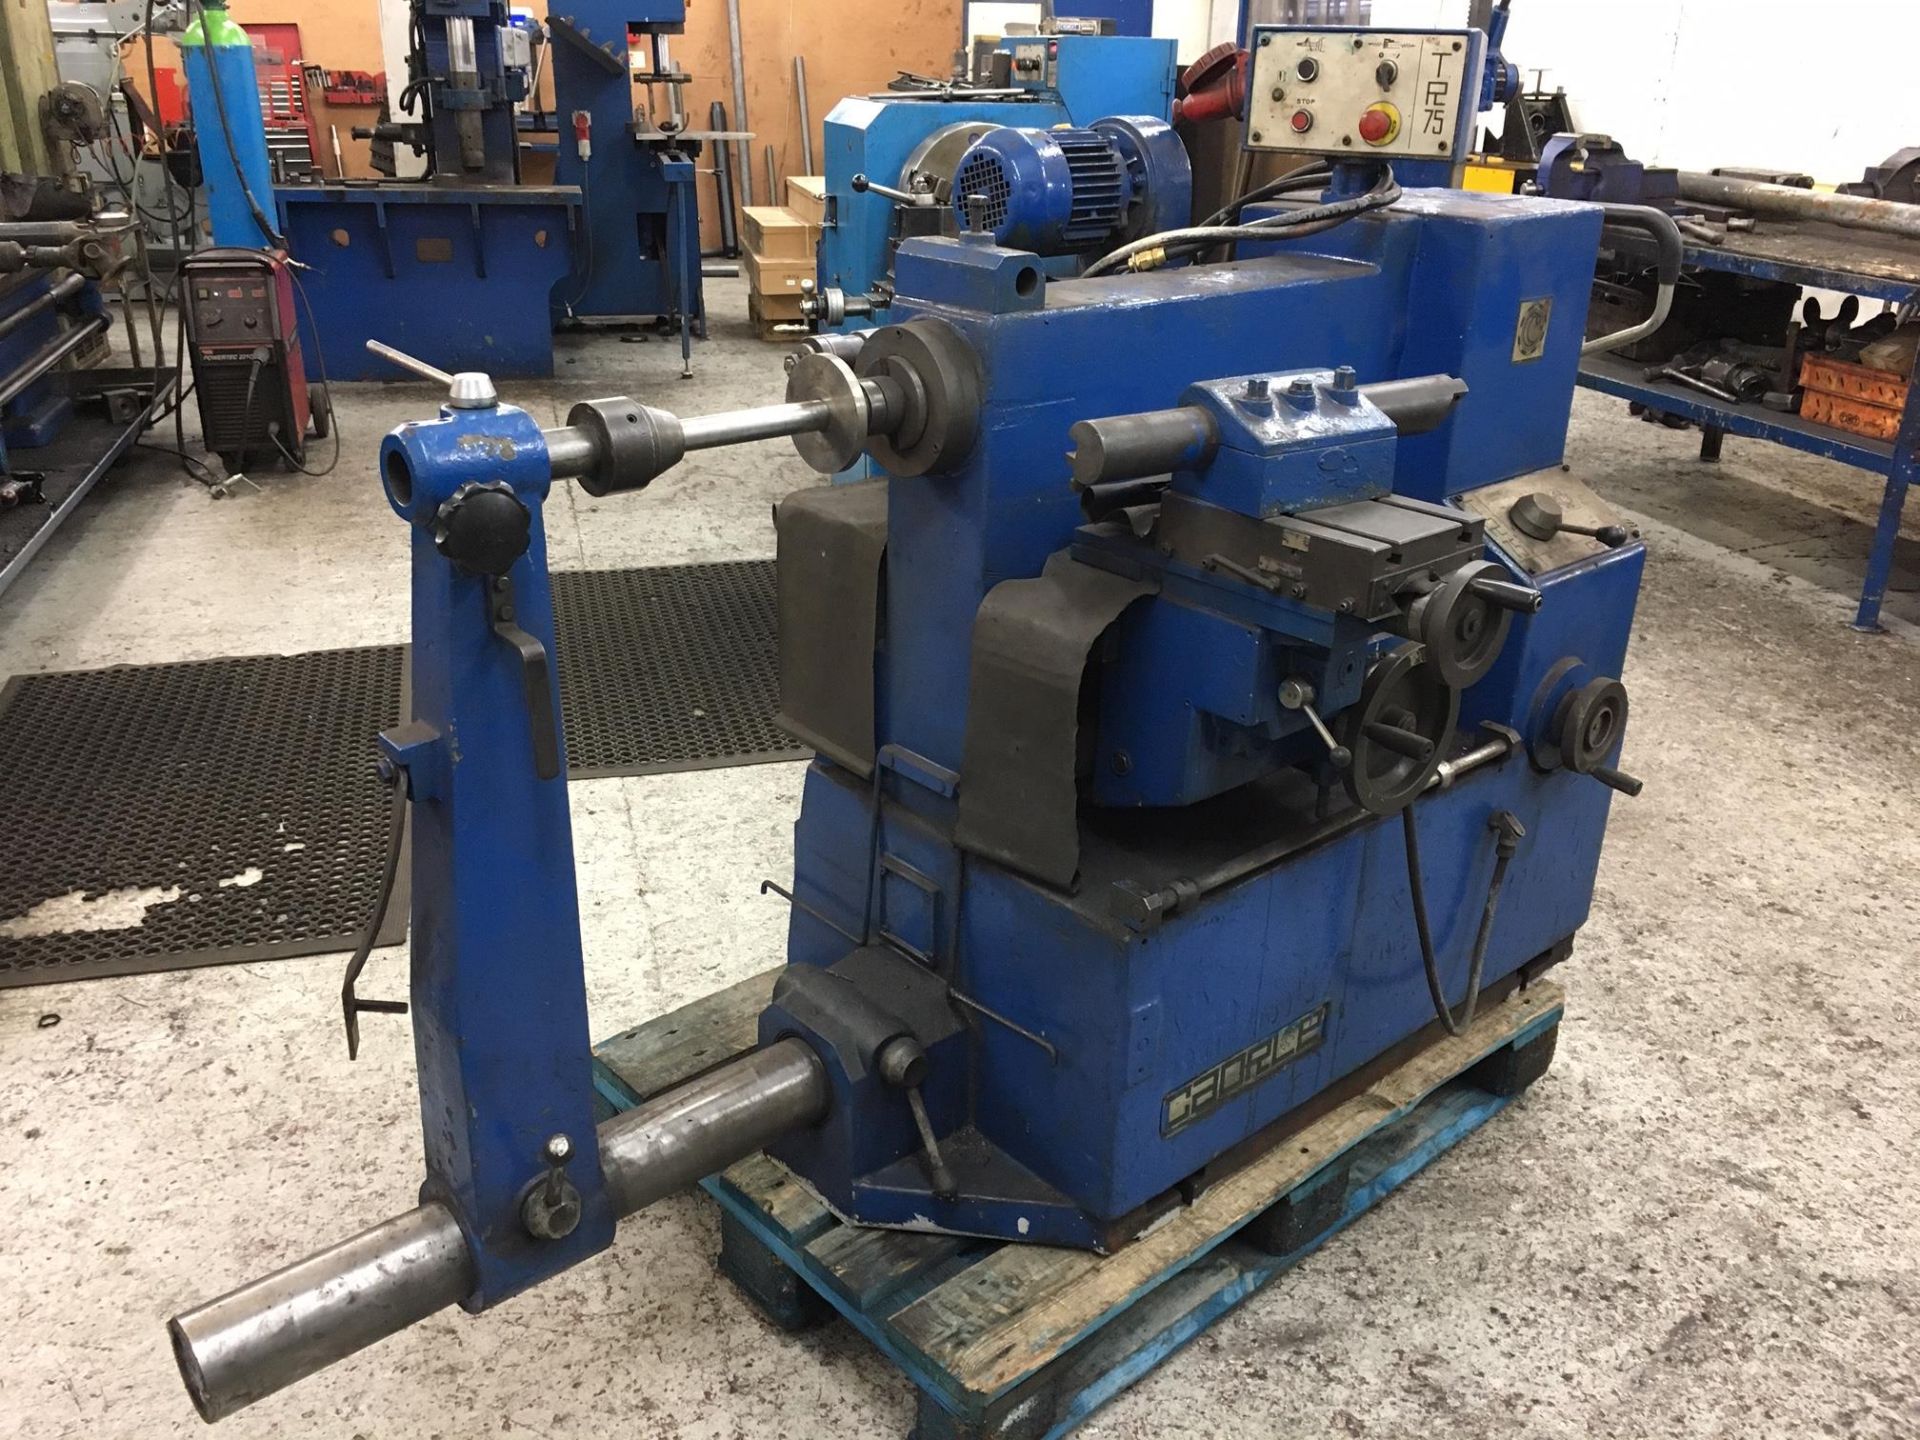 CAORLE TR 75 BRAKE DRUM AND FLYWHEEL LATHE THAT IS SURPLUS TO REQUIREMENTS.